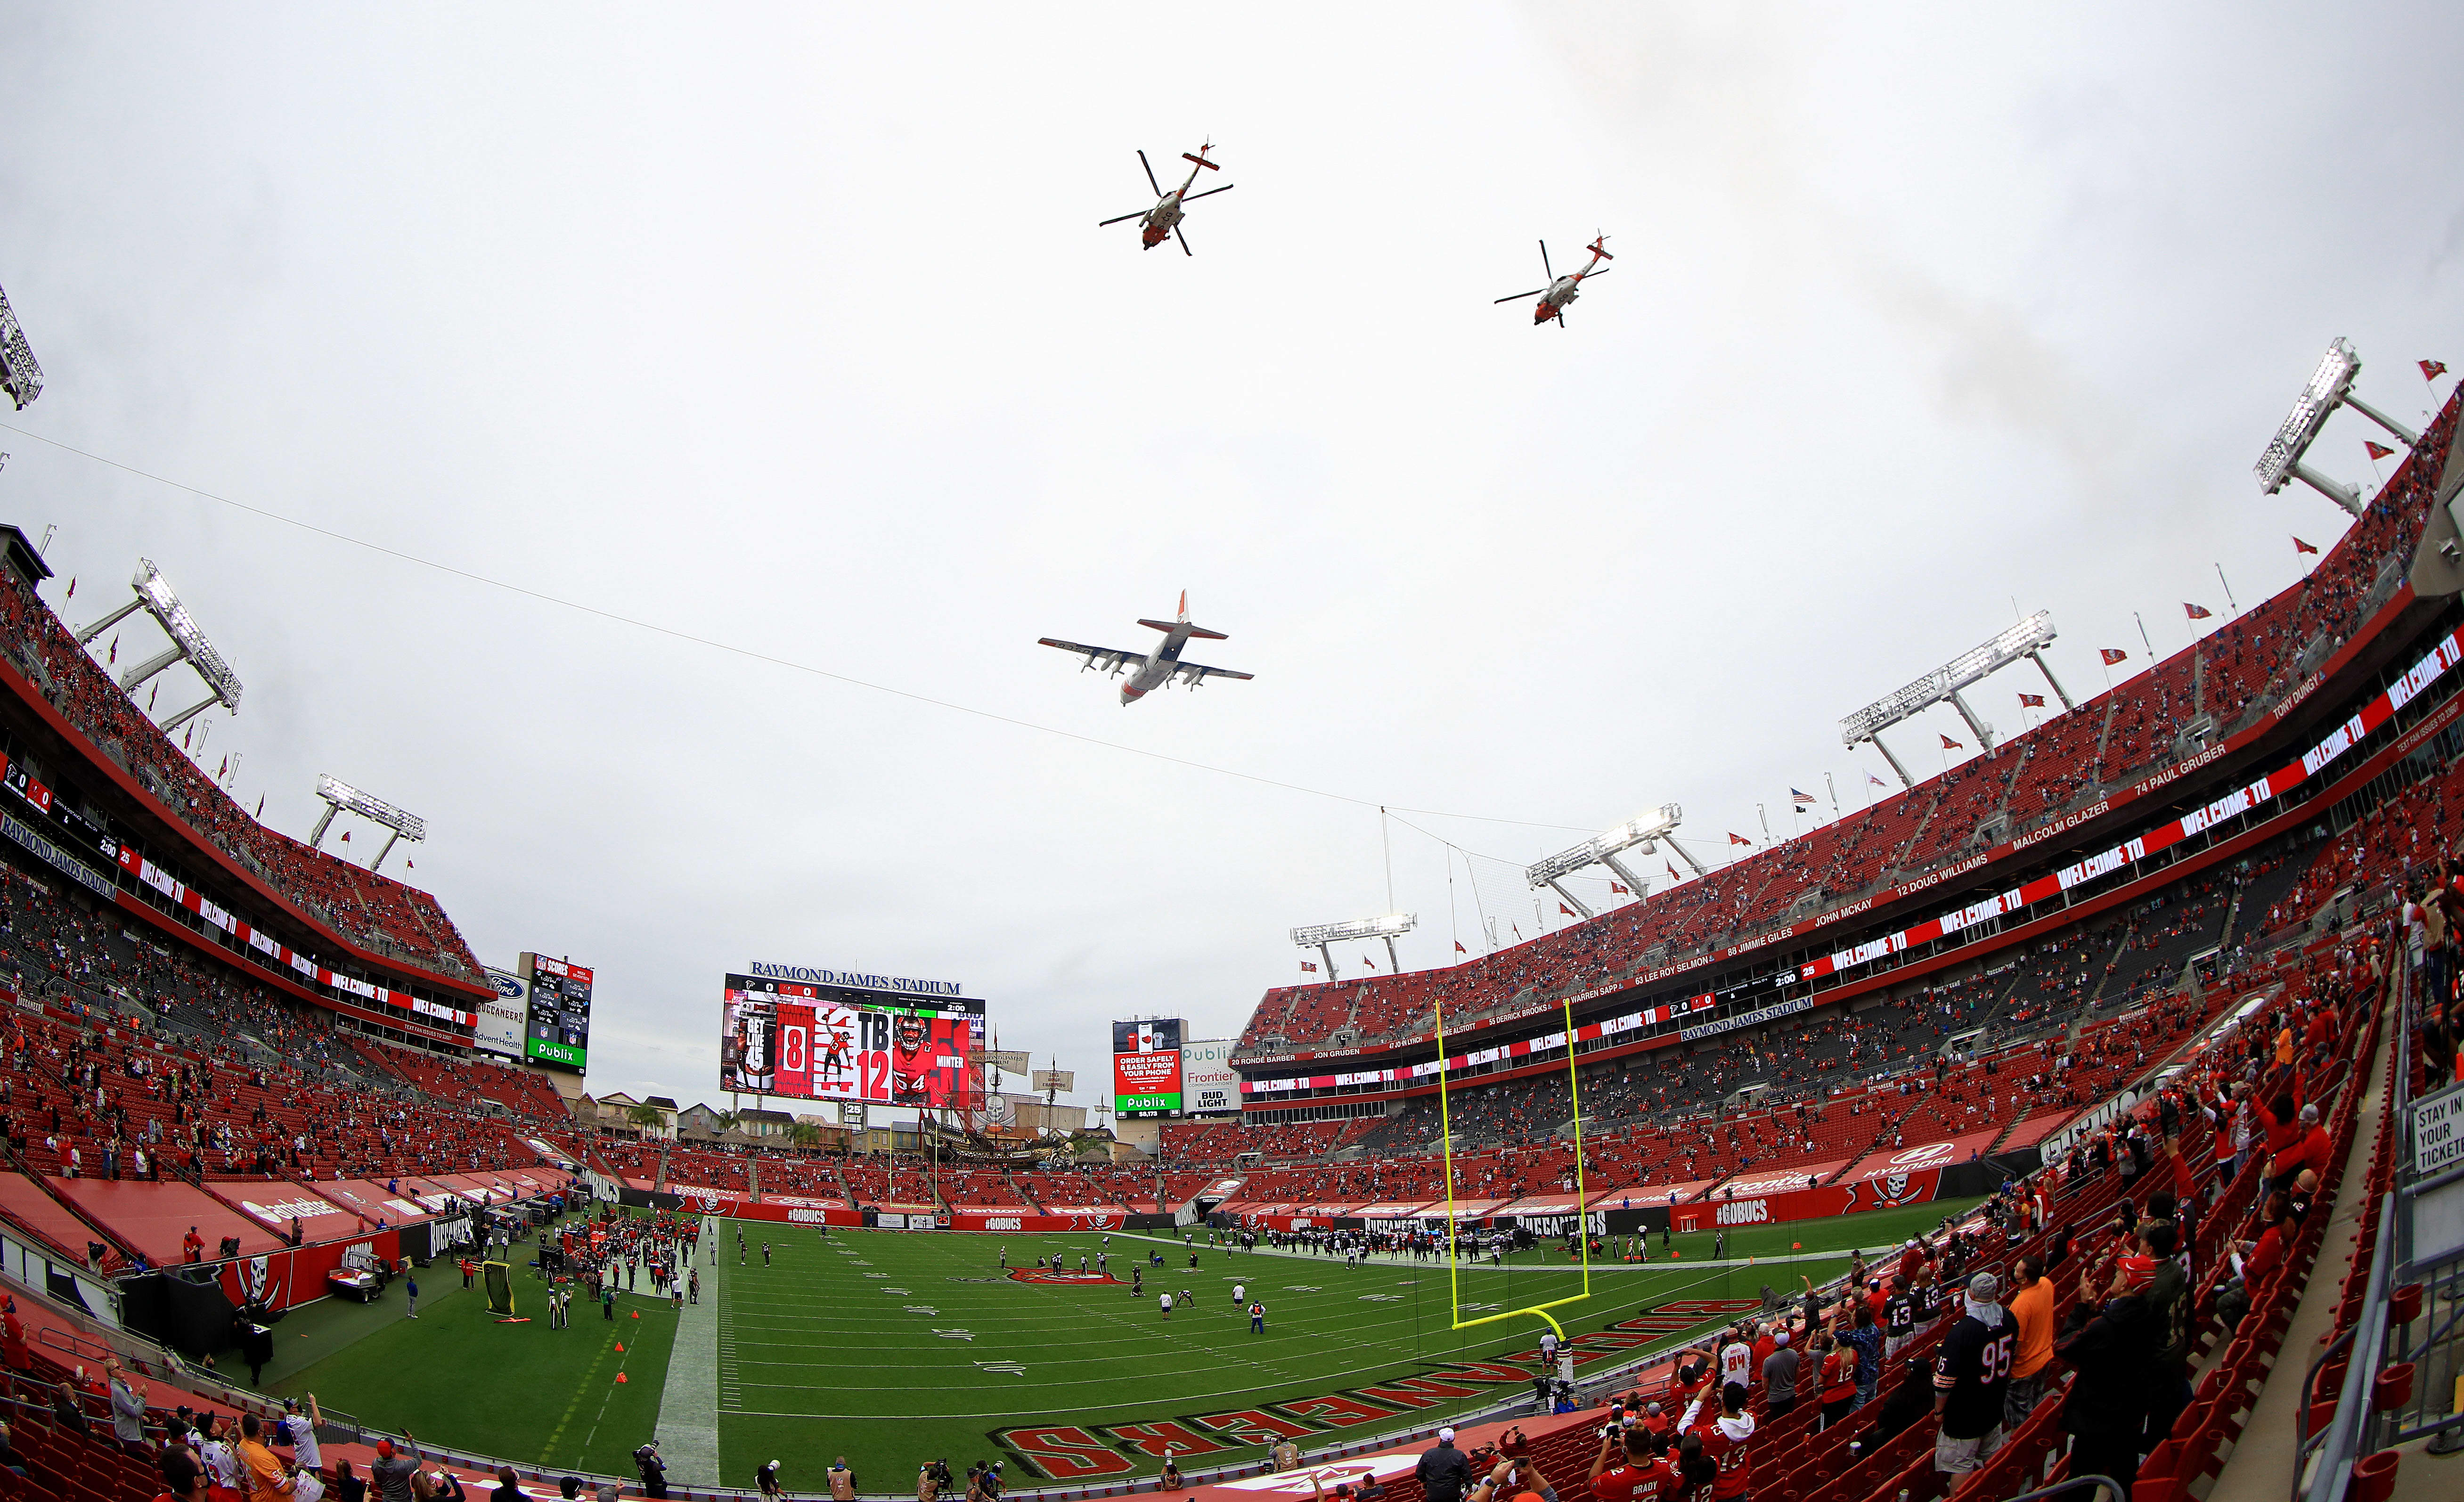 tampa bay buccaneers tickets for sale